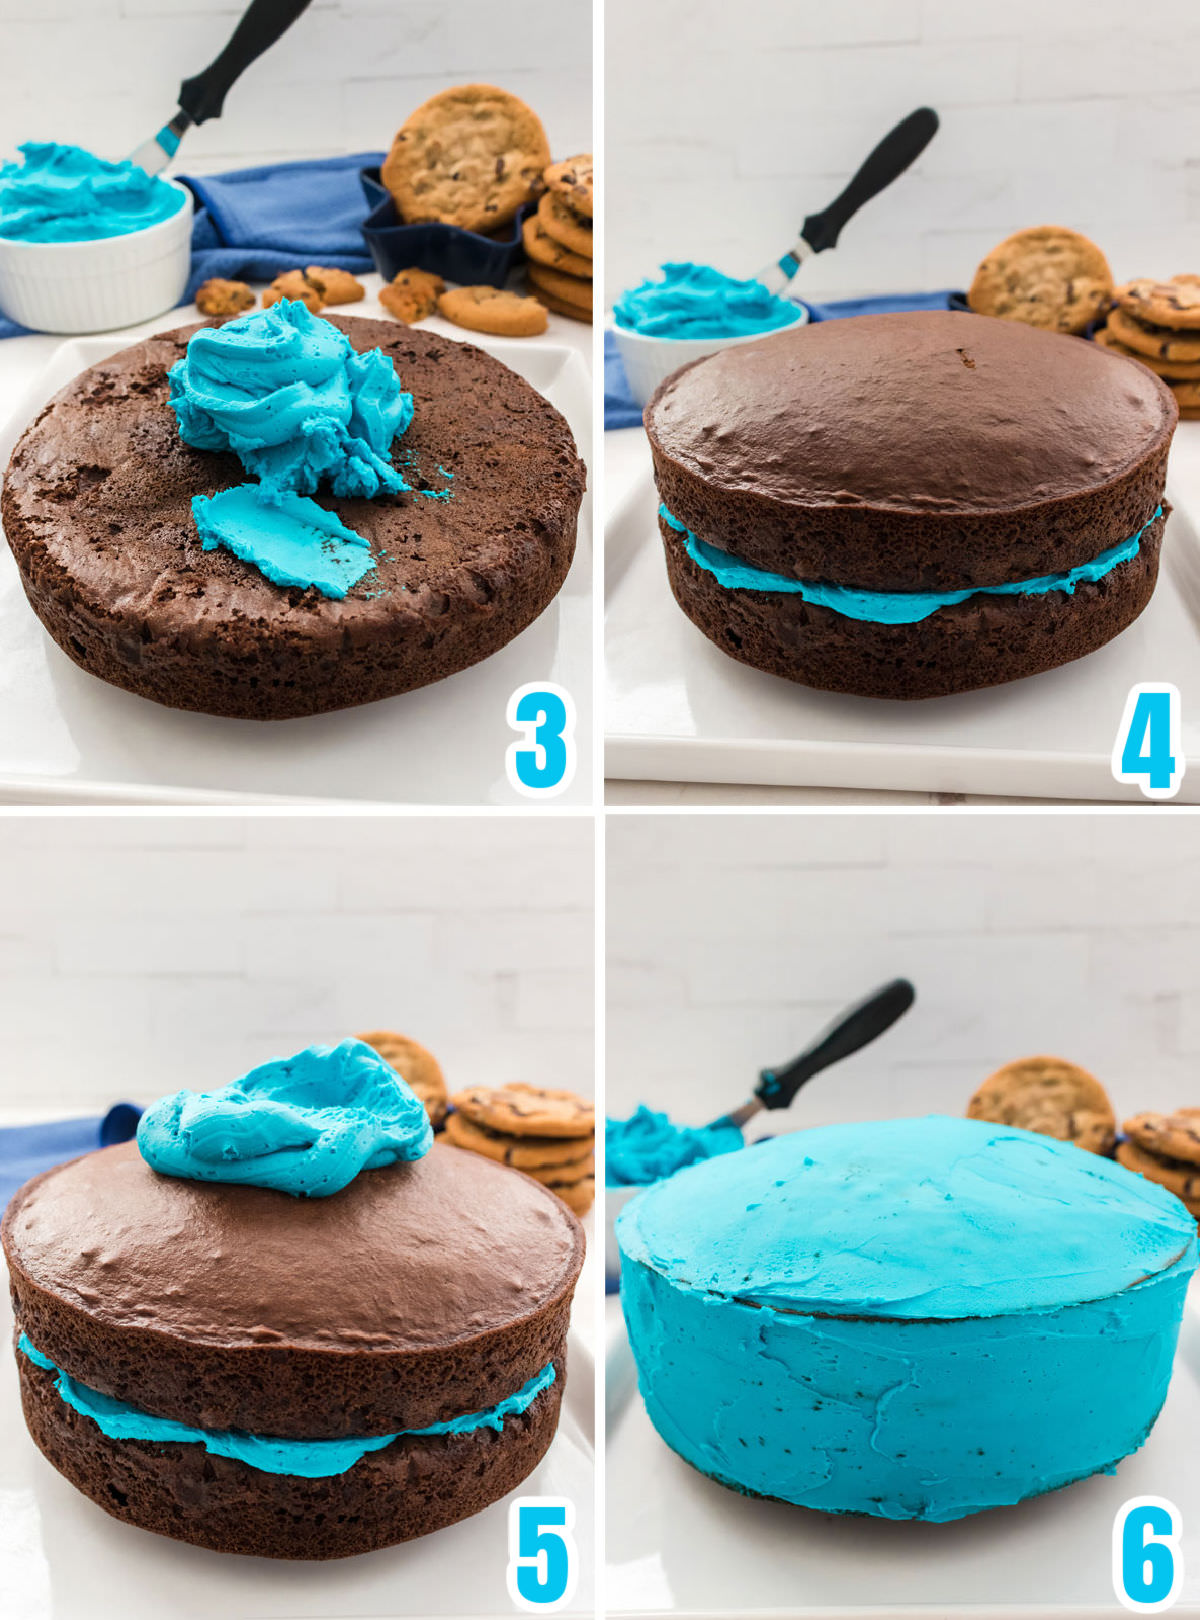 Collage image showing how to frost the two layer chocolate cake with the blue buttercream frosting.